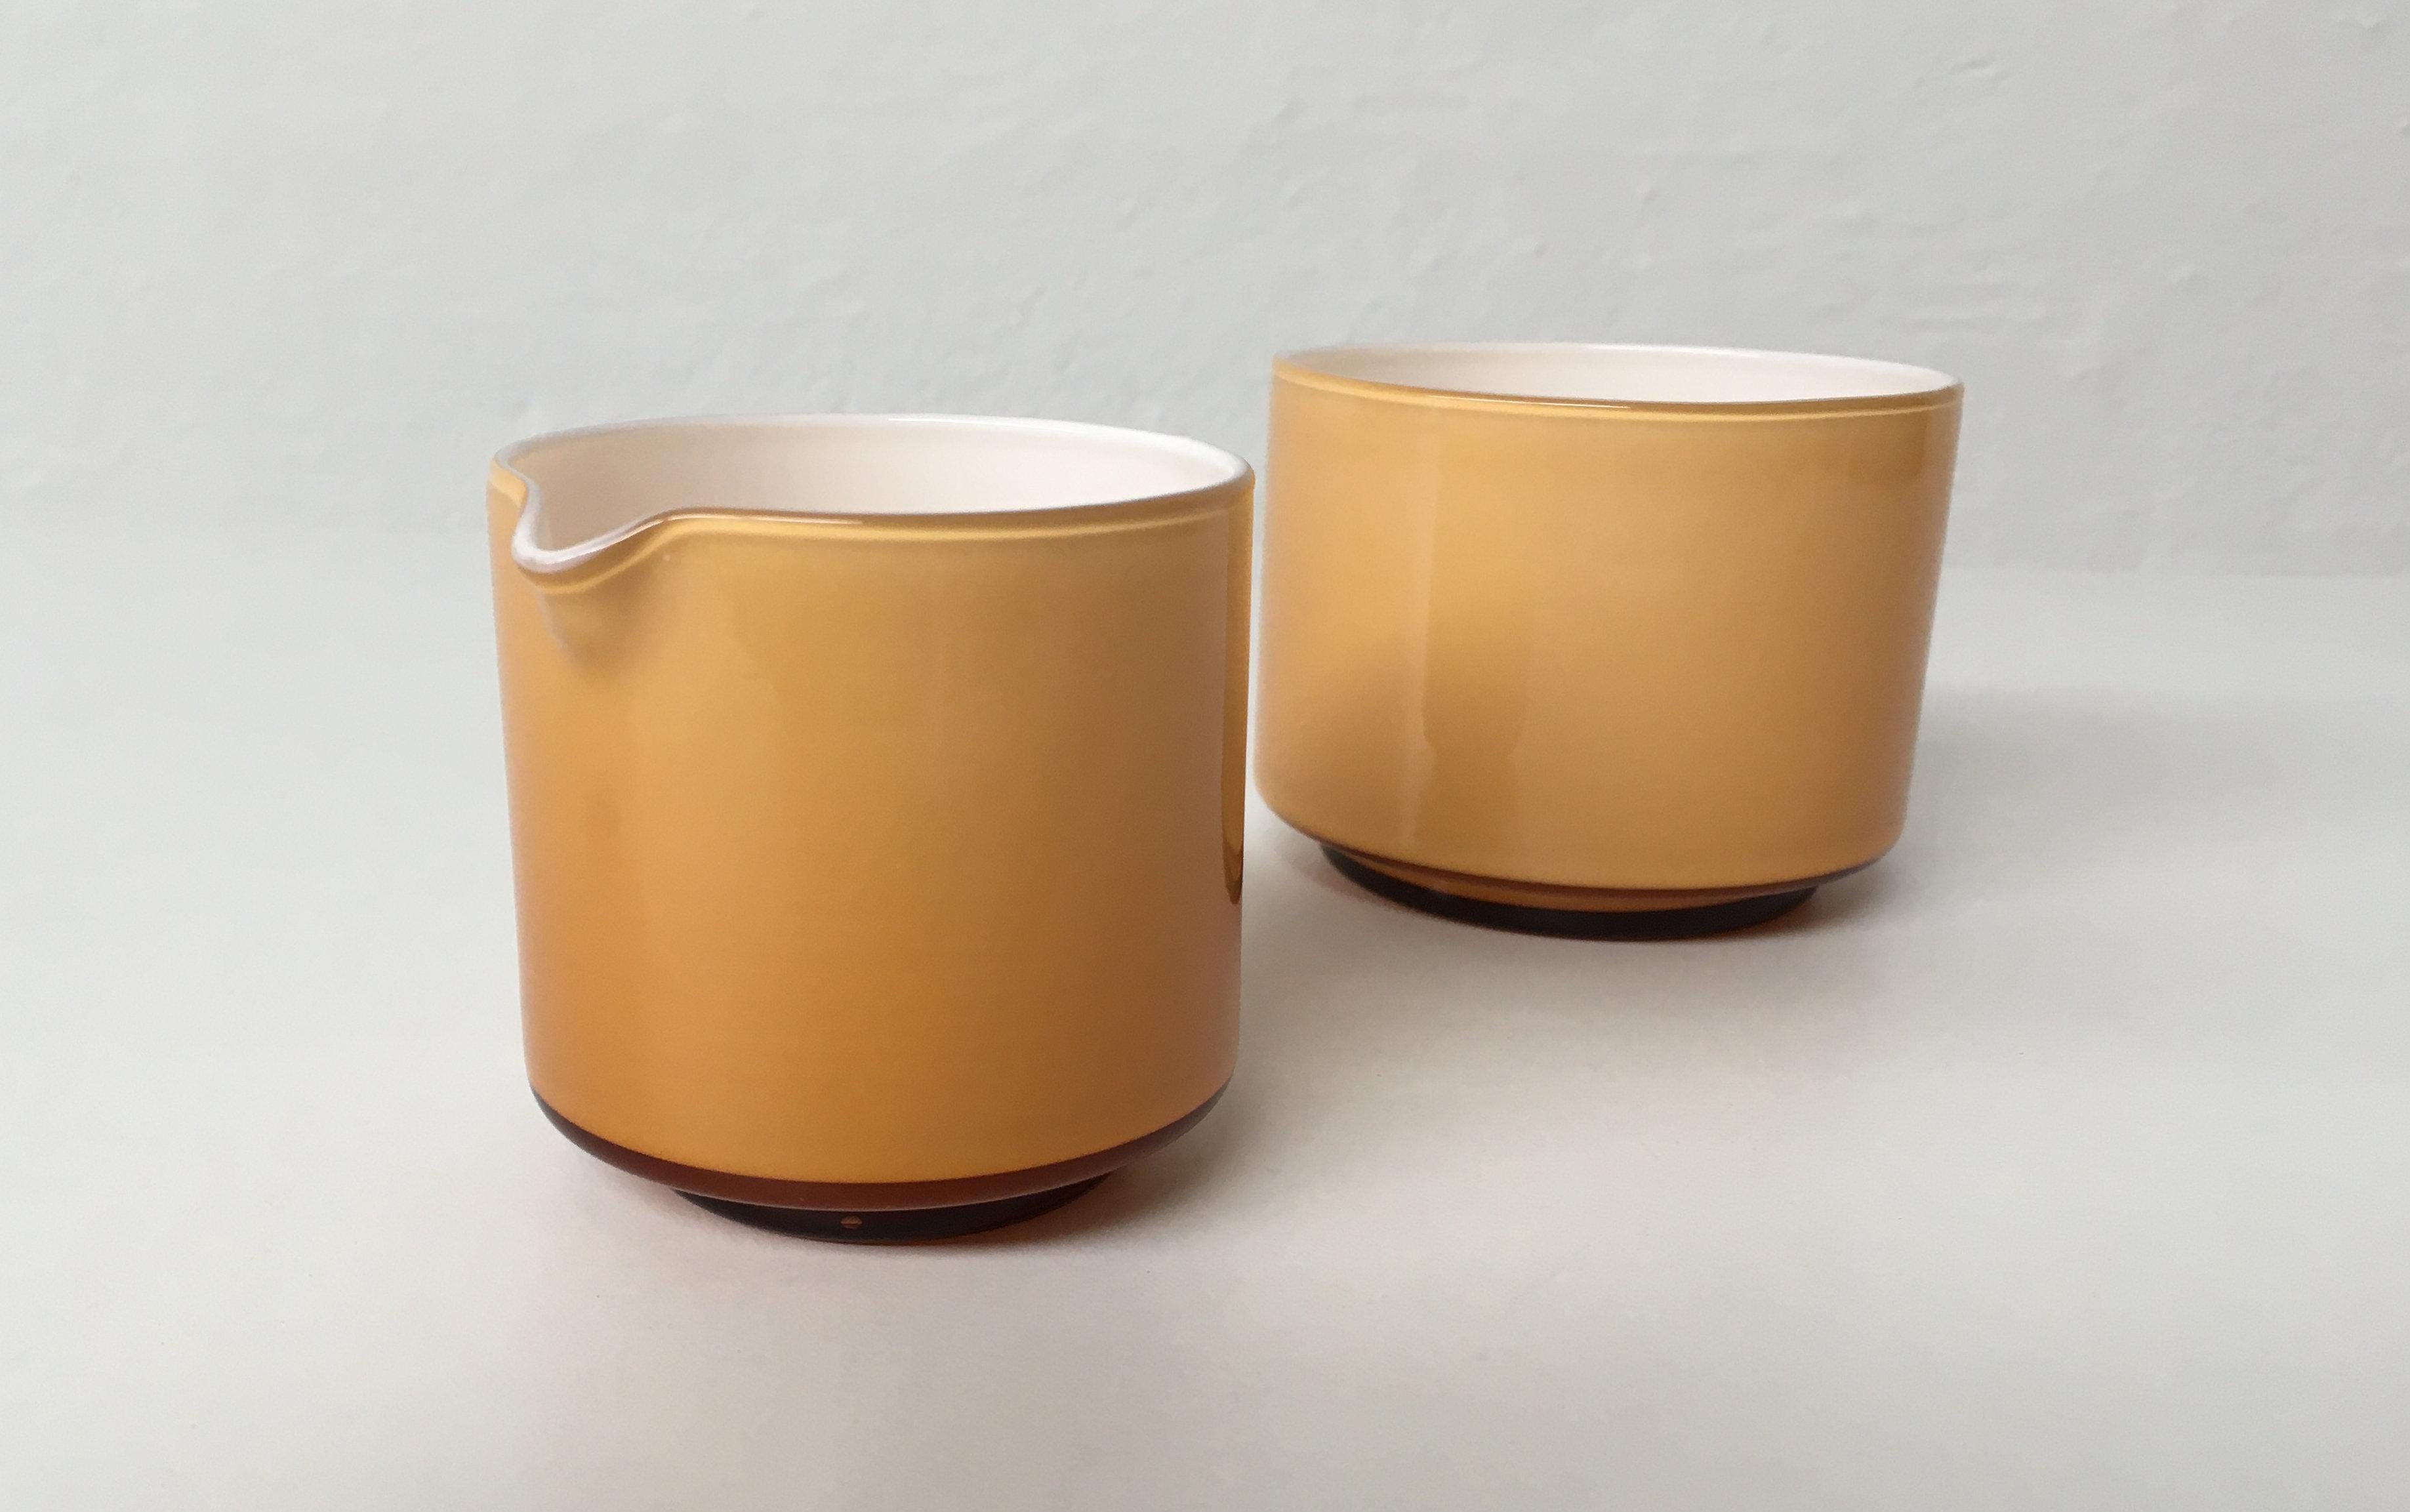 Set of honey-colored creamer and sugar bowls in handblown opaline glass, designed by Michael Bang and produced by Holmegaard in the 1970s.

The well designed set with it´s 1970´s colors is in very good condition.

Michael Bang (1942-2013) was